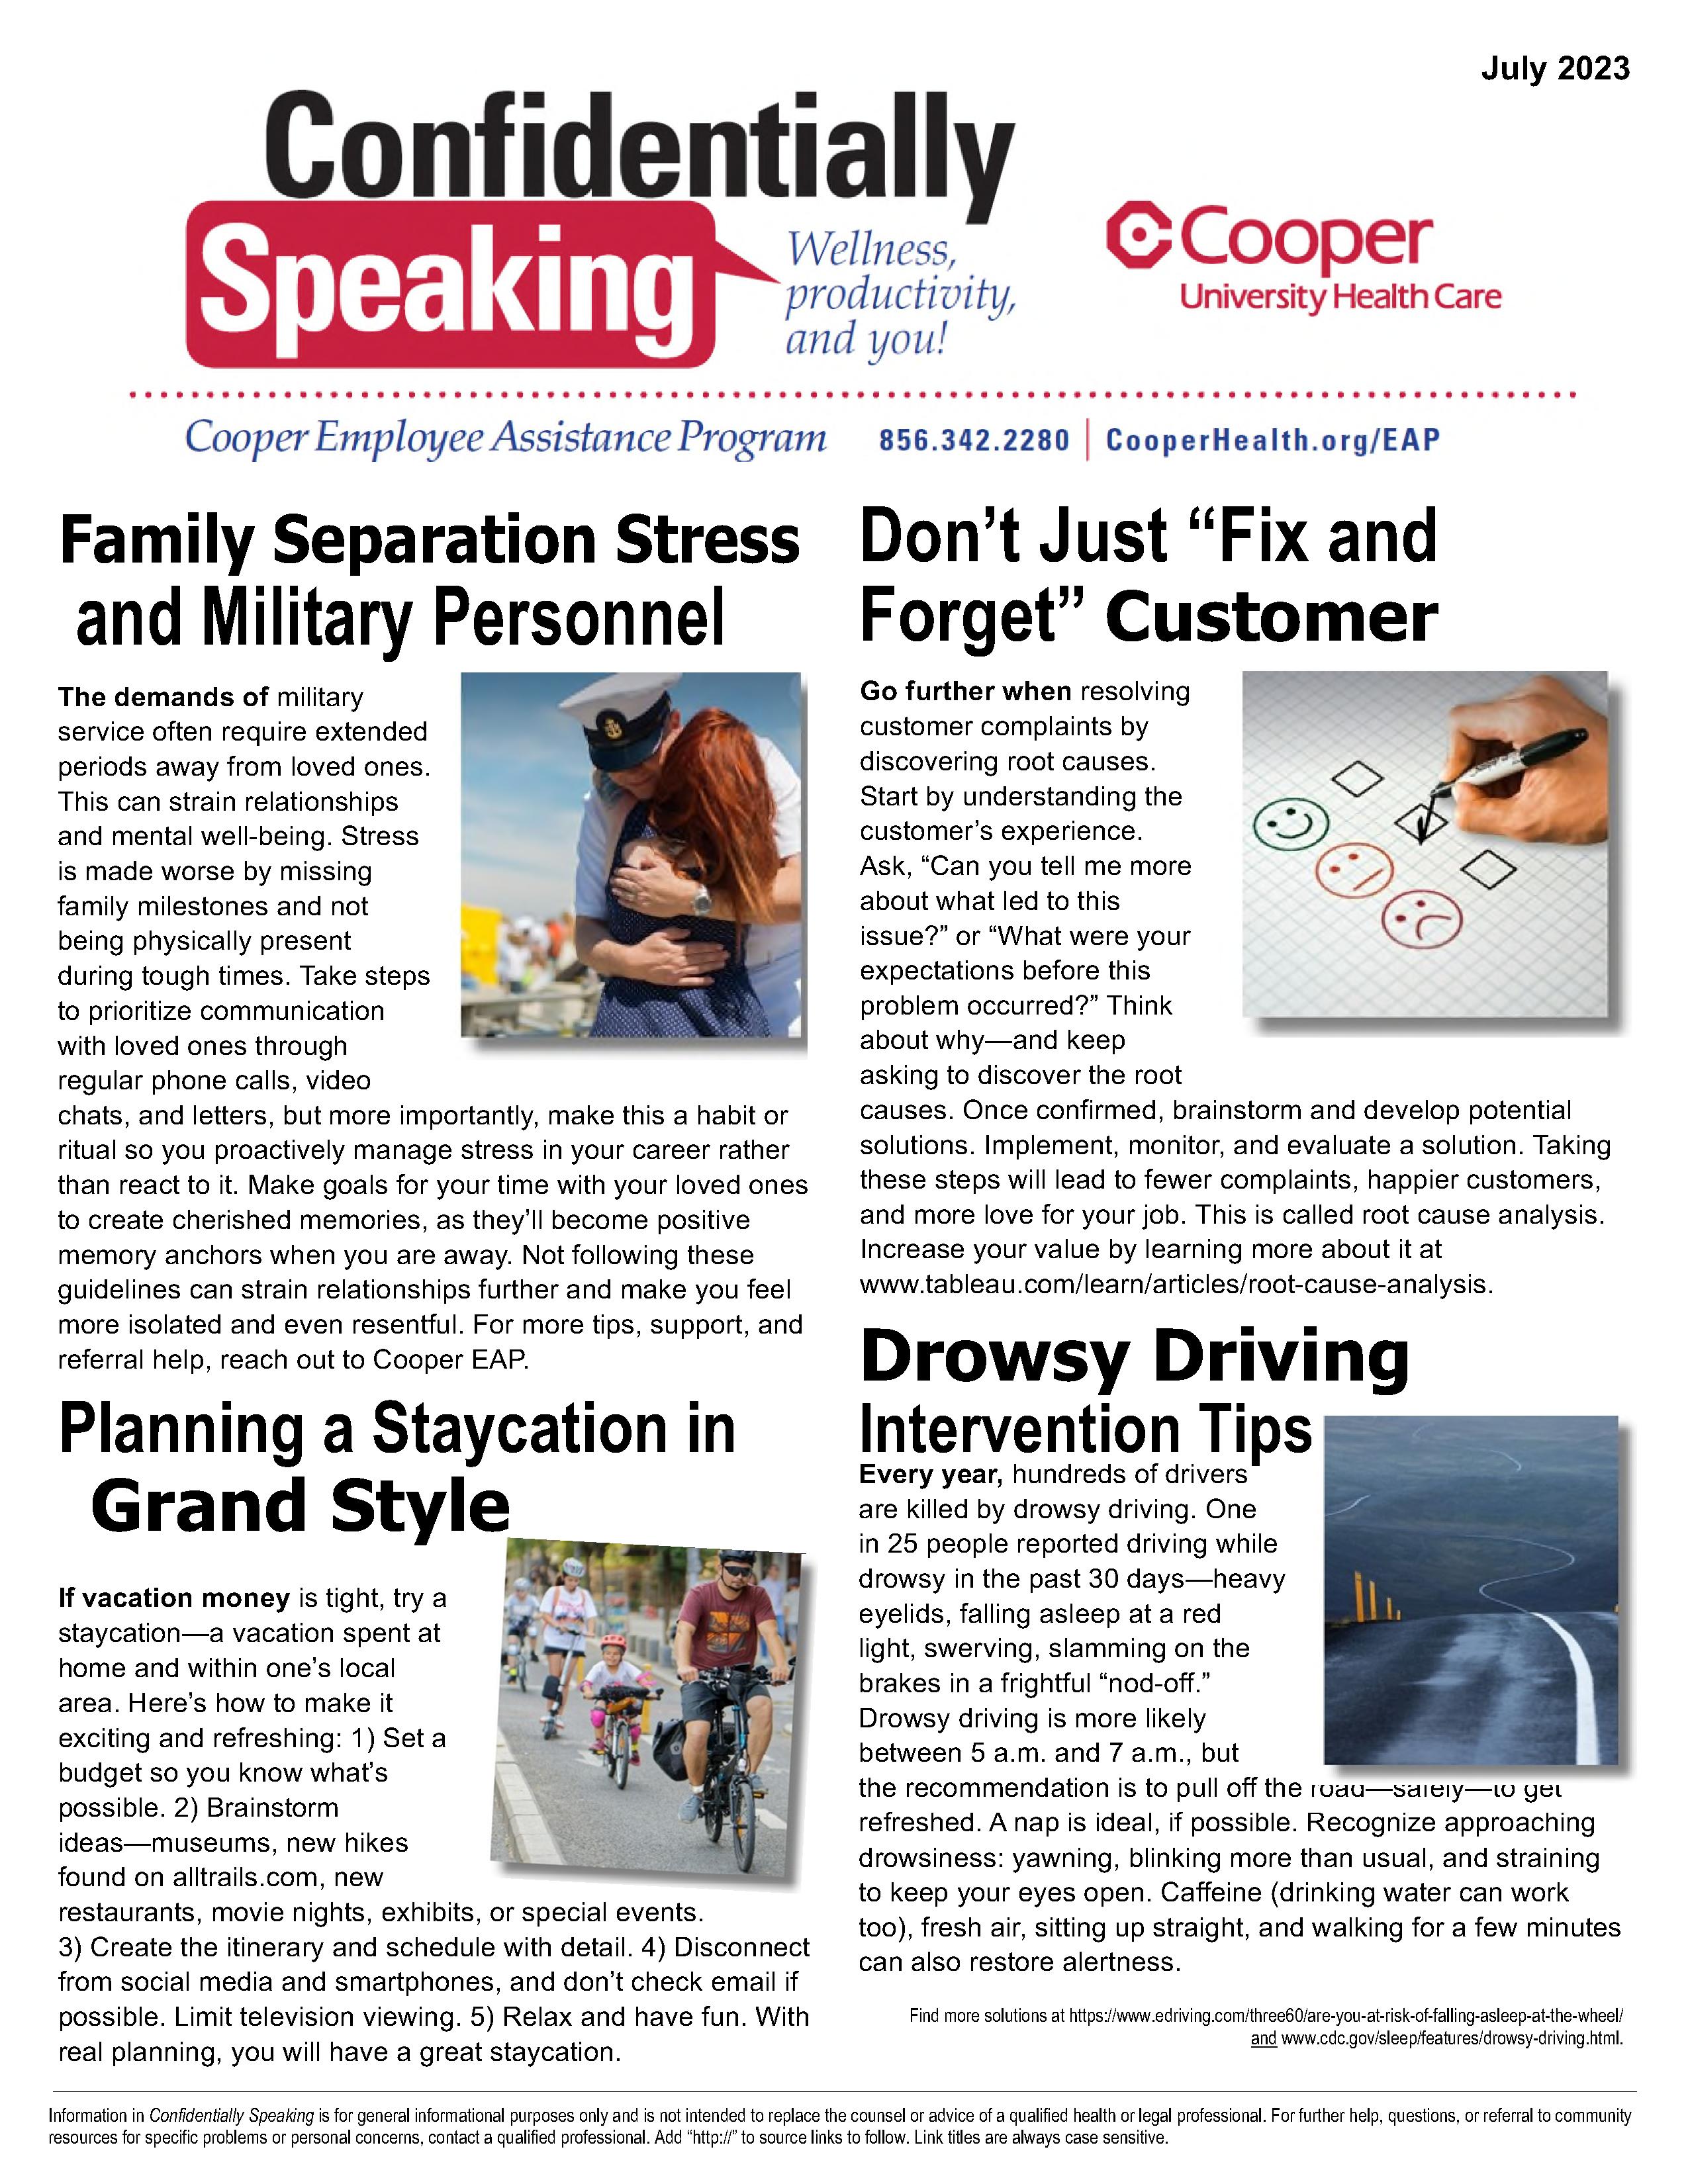 July 2023 Confidentially Speaking Newsletter Cover